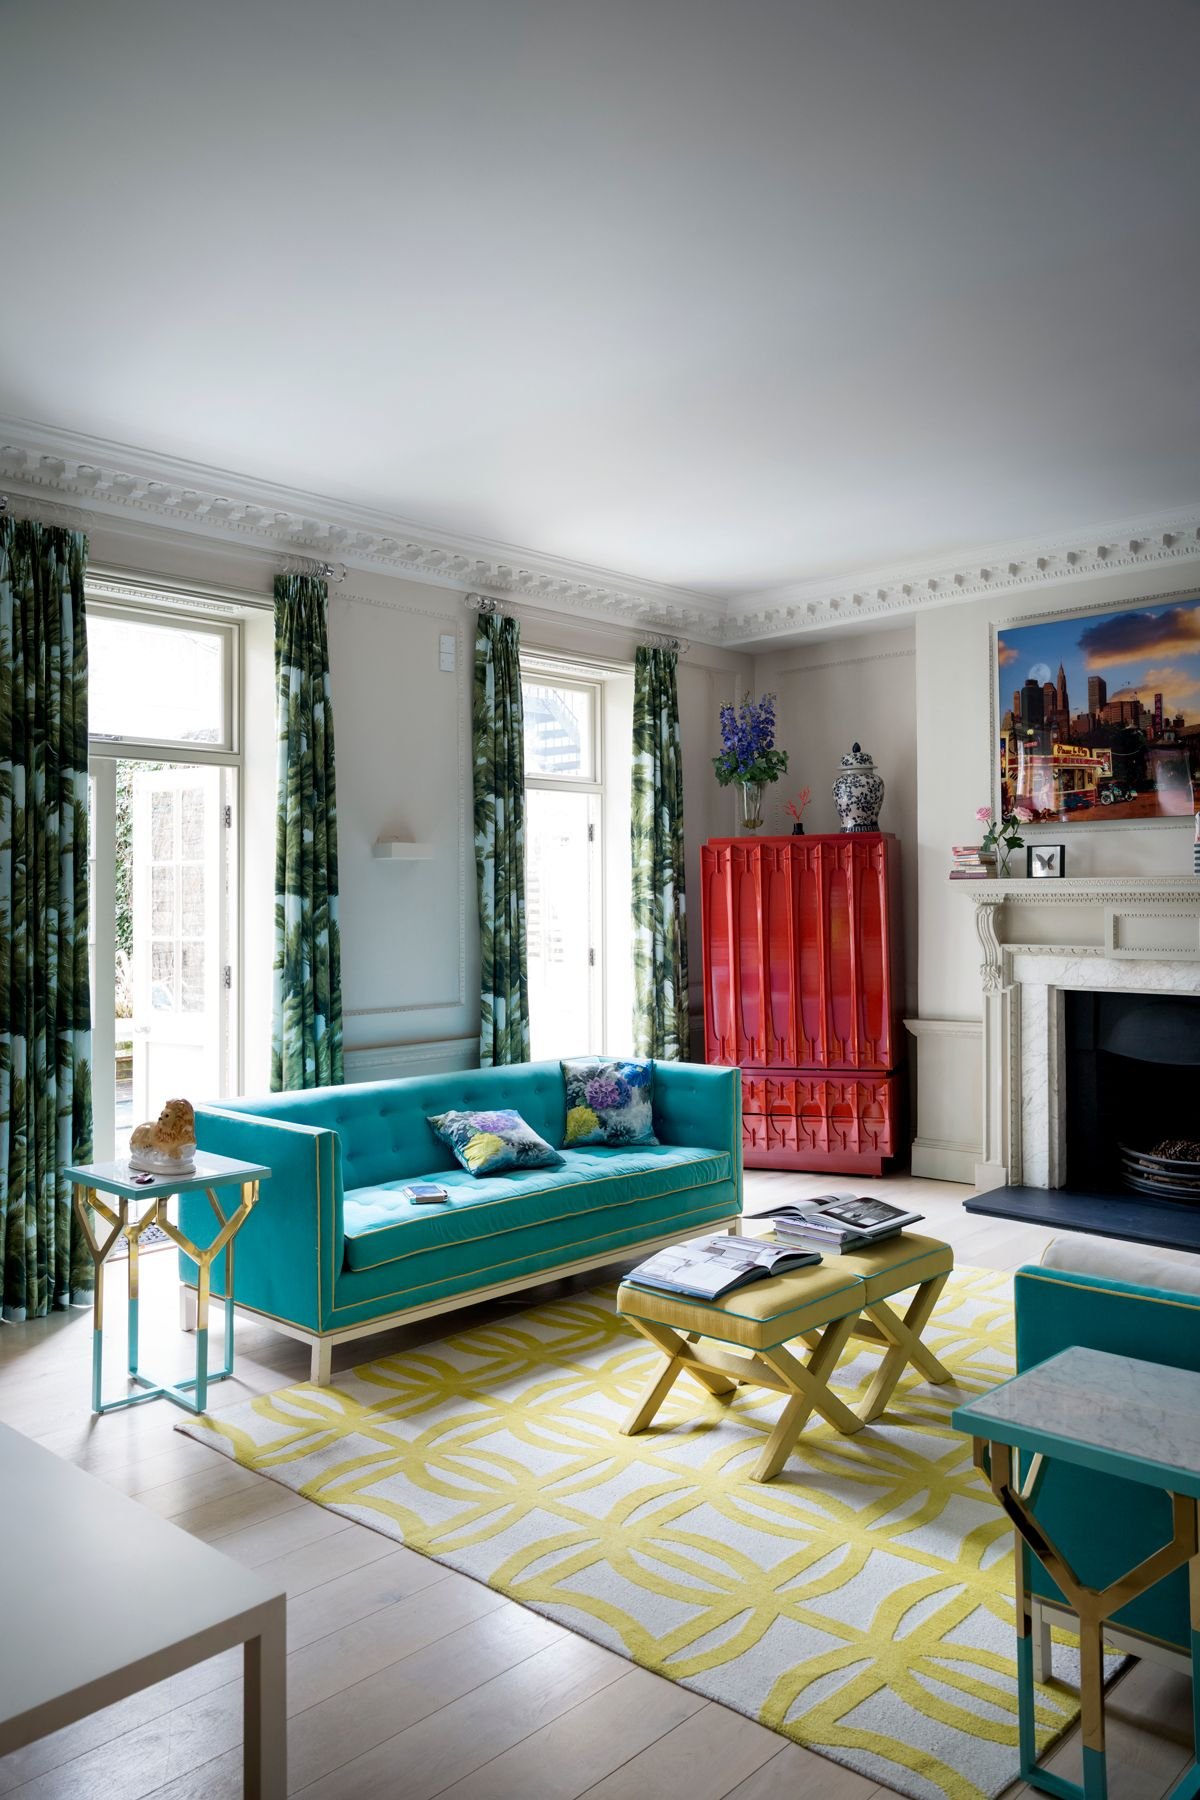 Step inside this joyous Georgian London townhouse with more than a little Palm Springs style